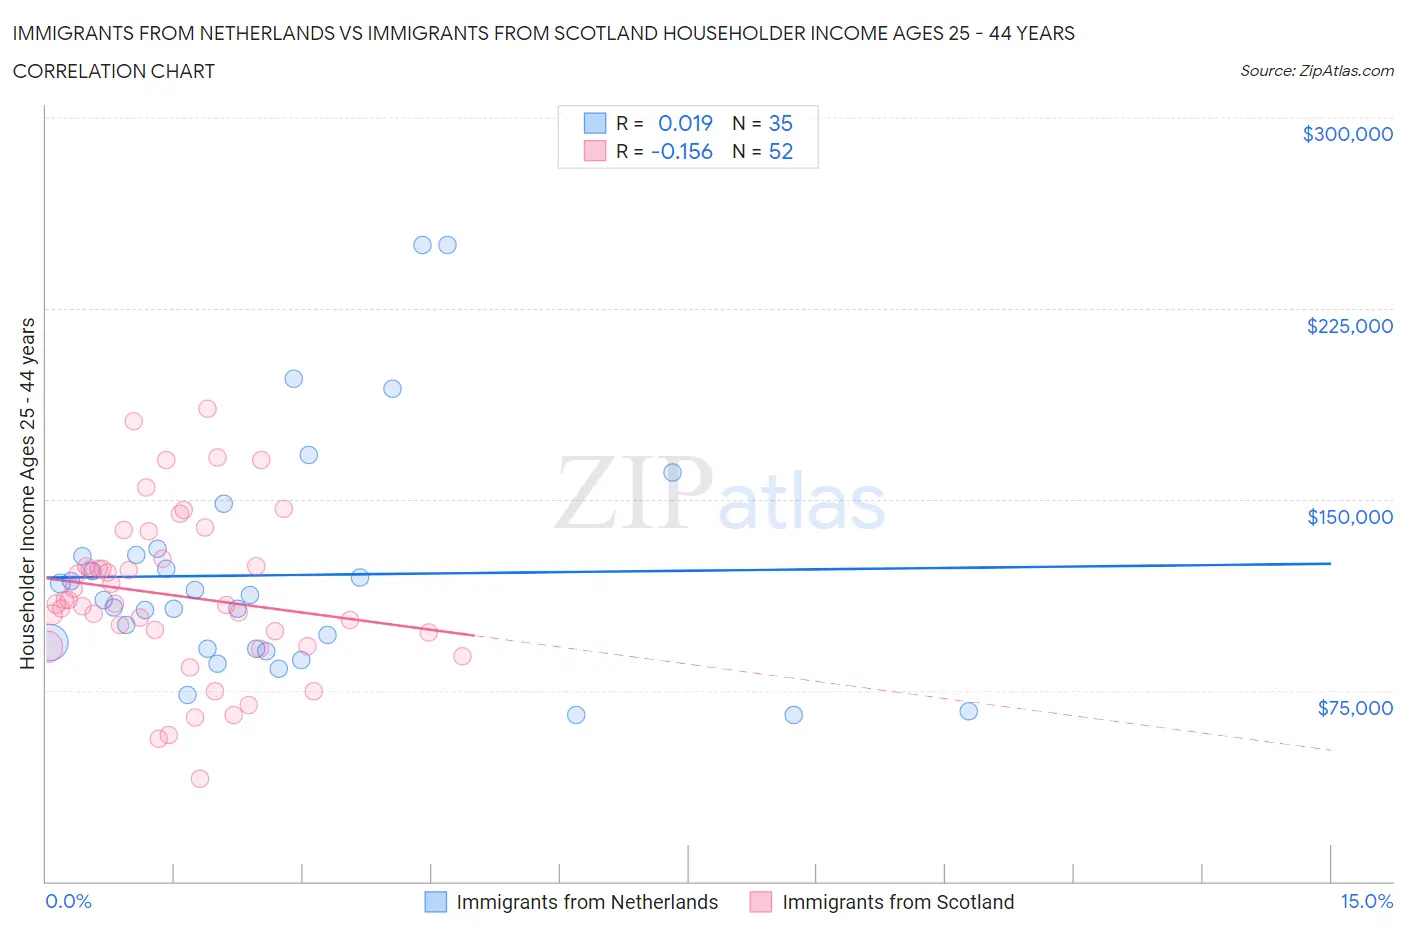 Immigrants from Netherlands vs Immigrants from Scotland Householder Income Ages 25 - 44 years